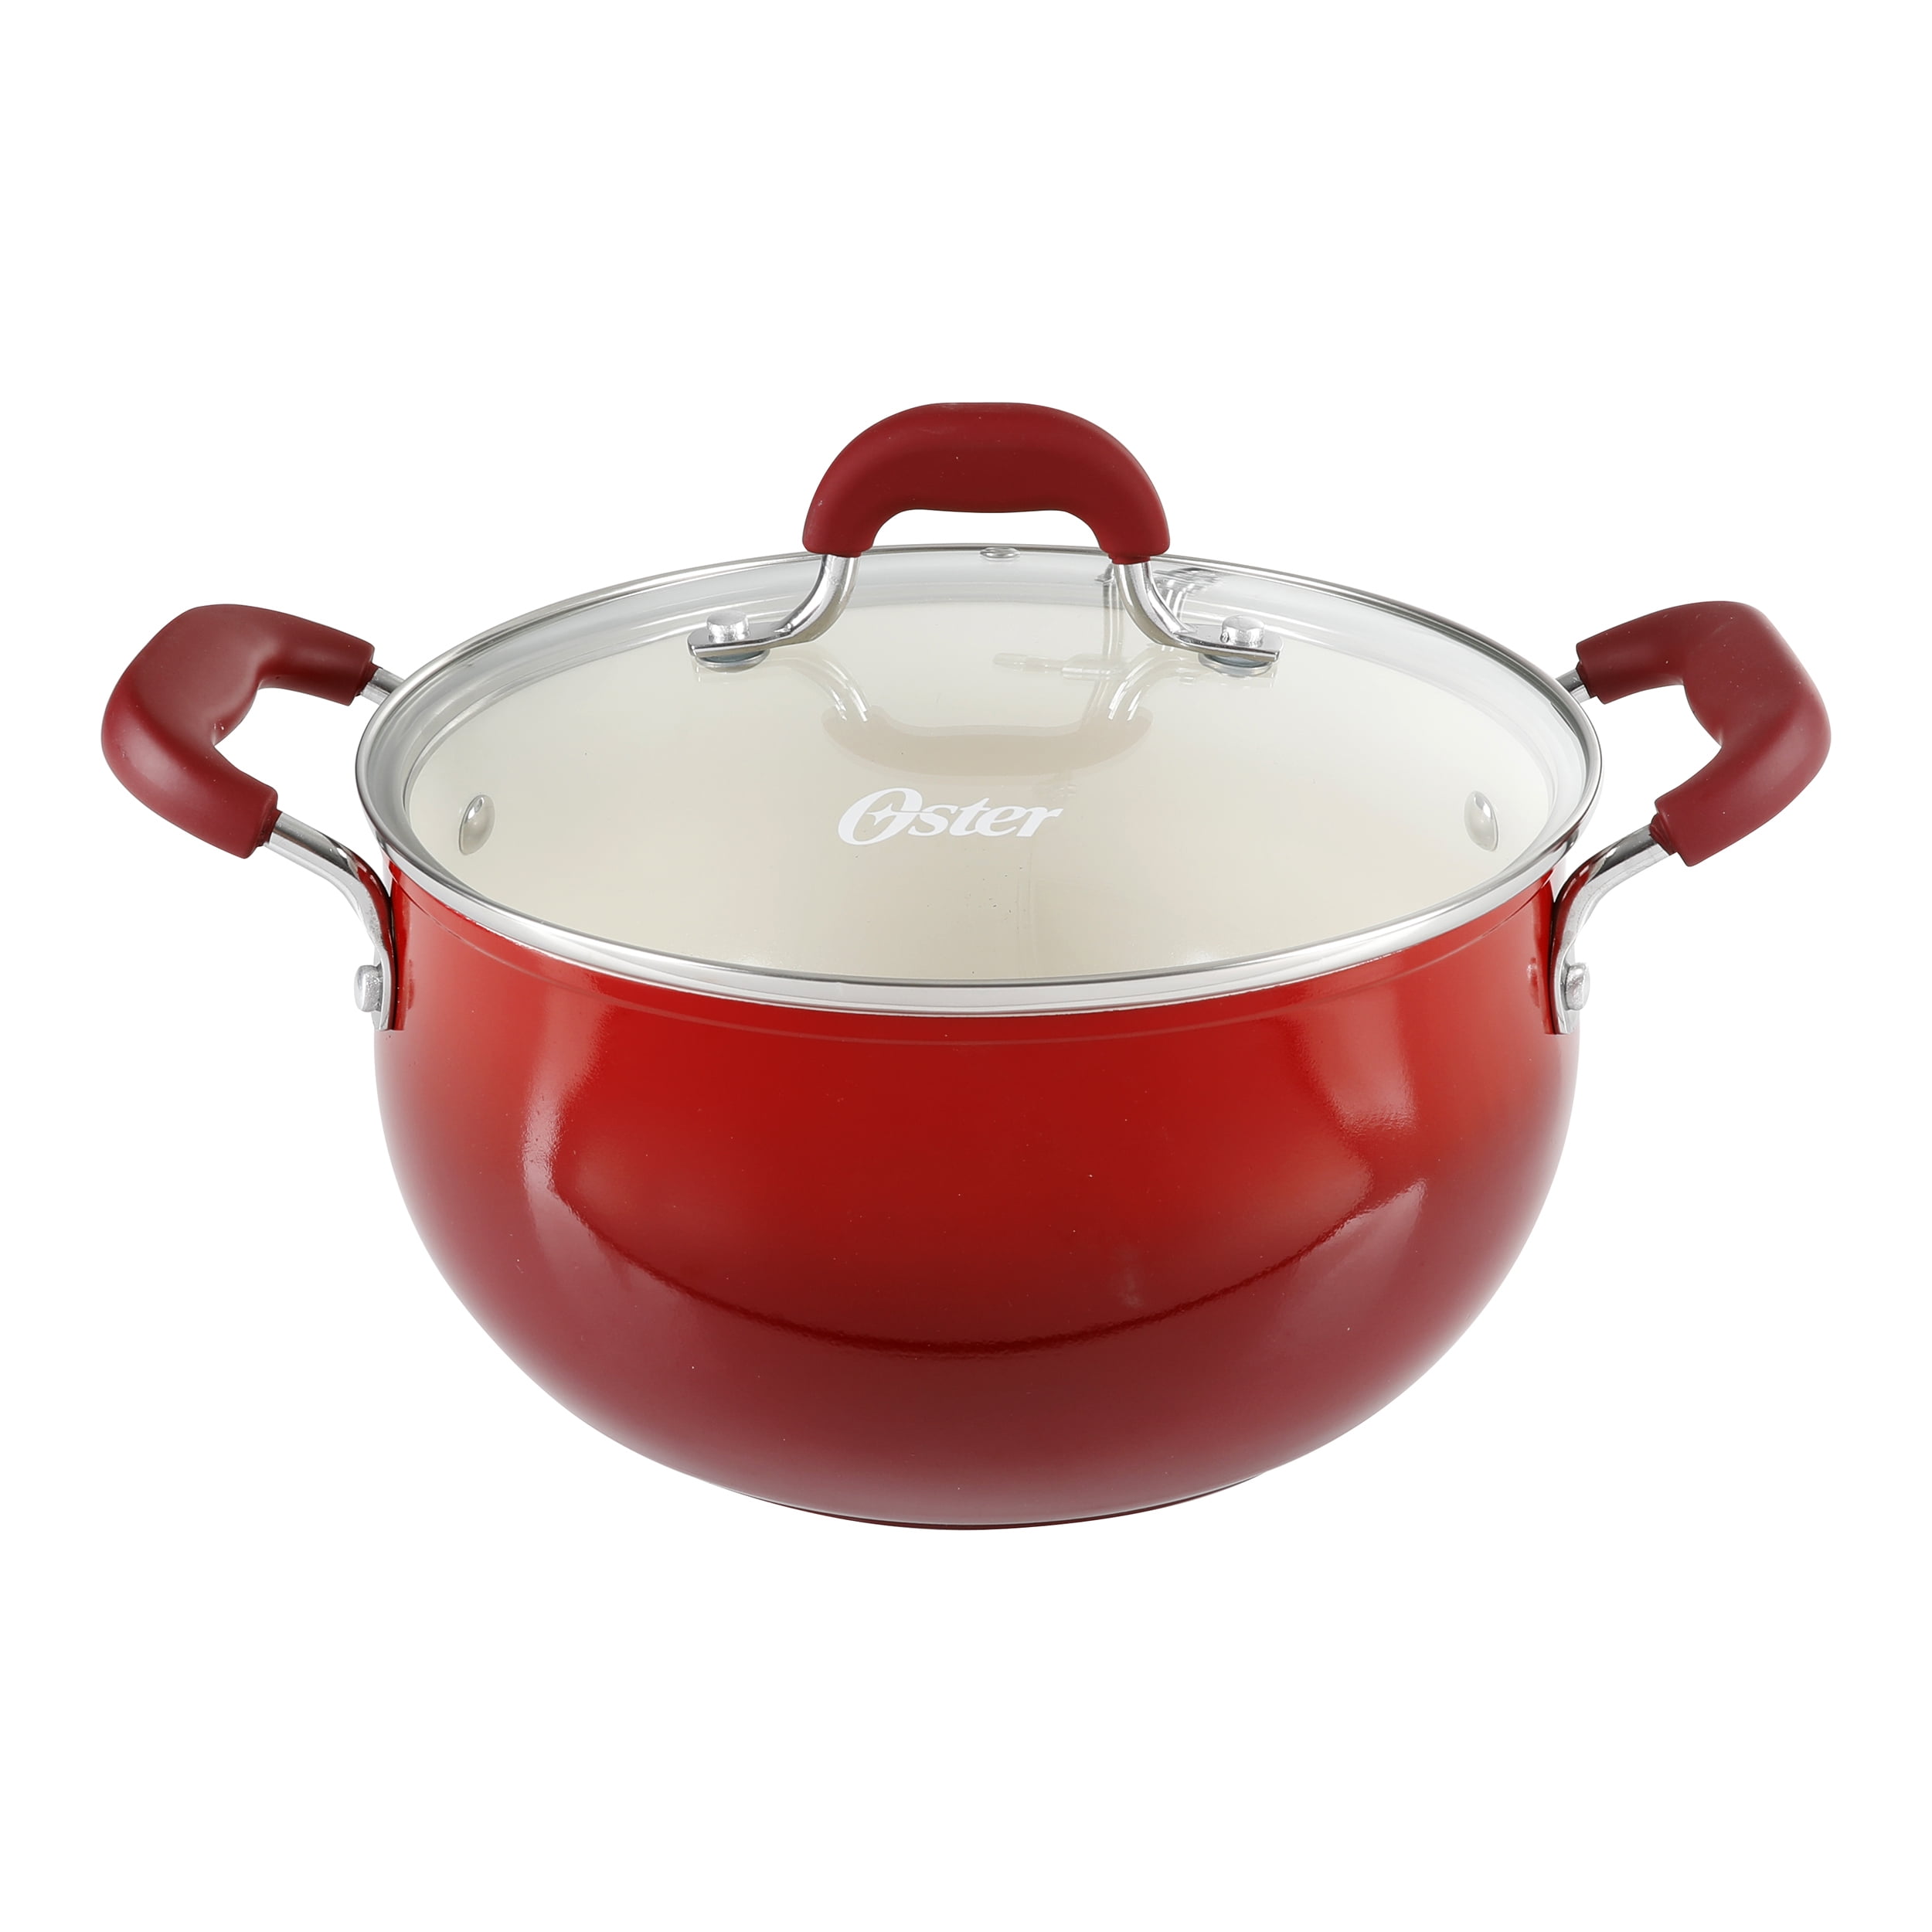 Oster 128653.07 7 Piece Non Stick Aluminum Cookware Set in Red